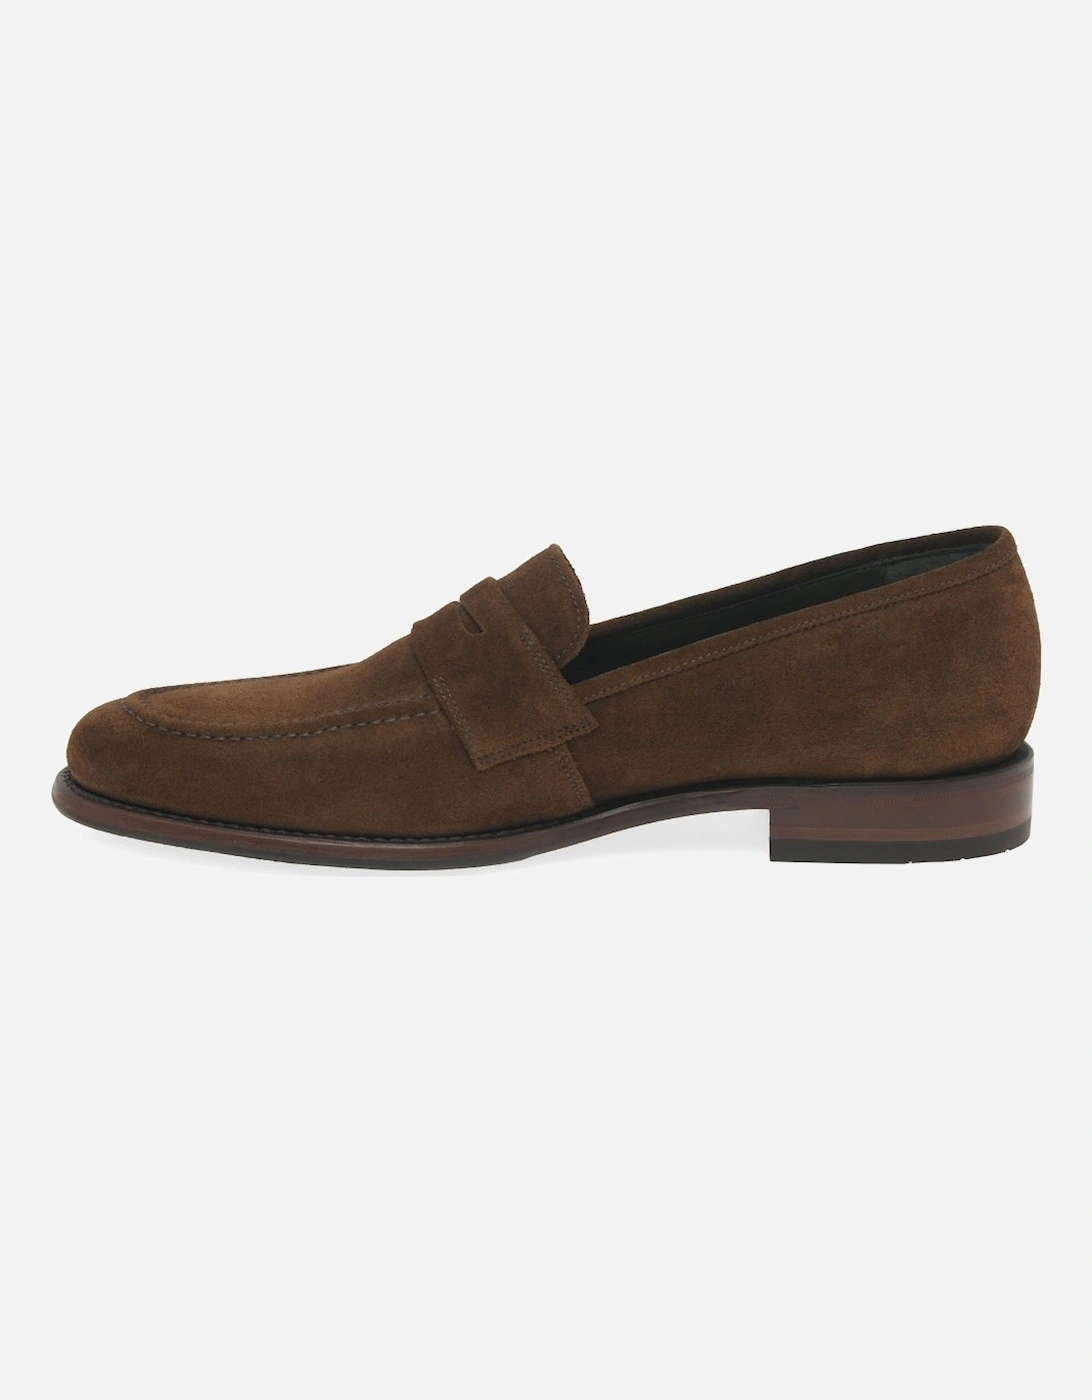 Wiggins Mens Penny Loafers